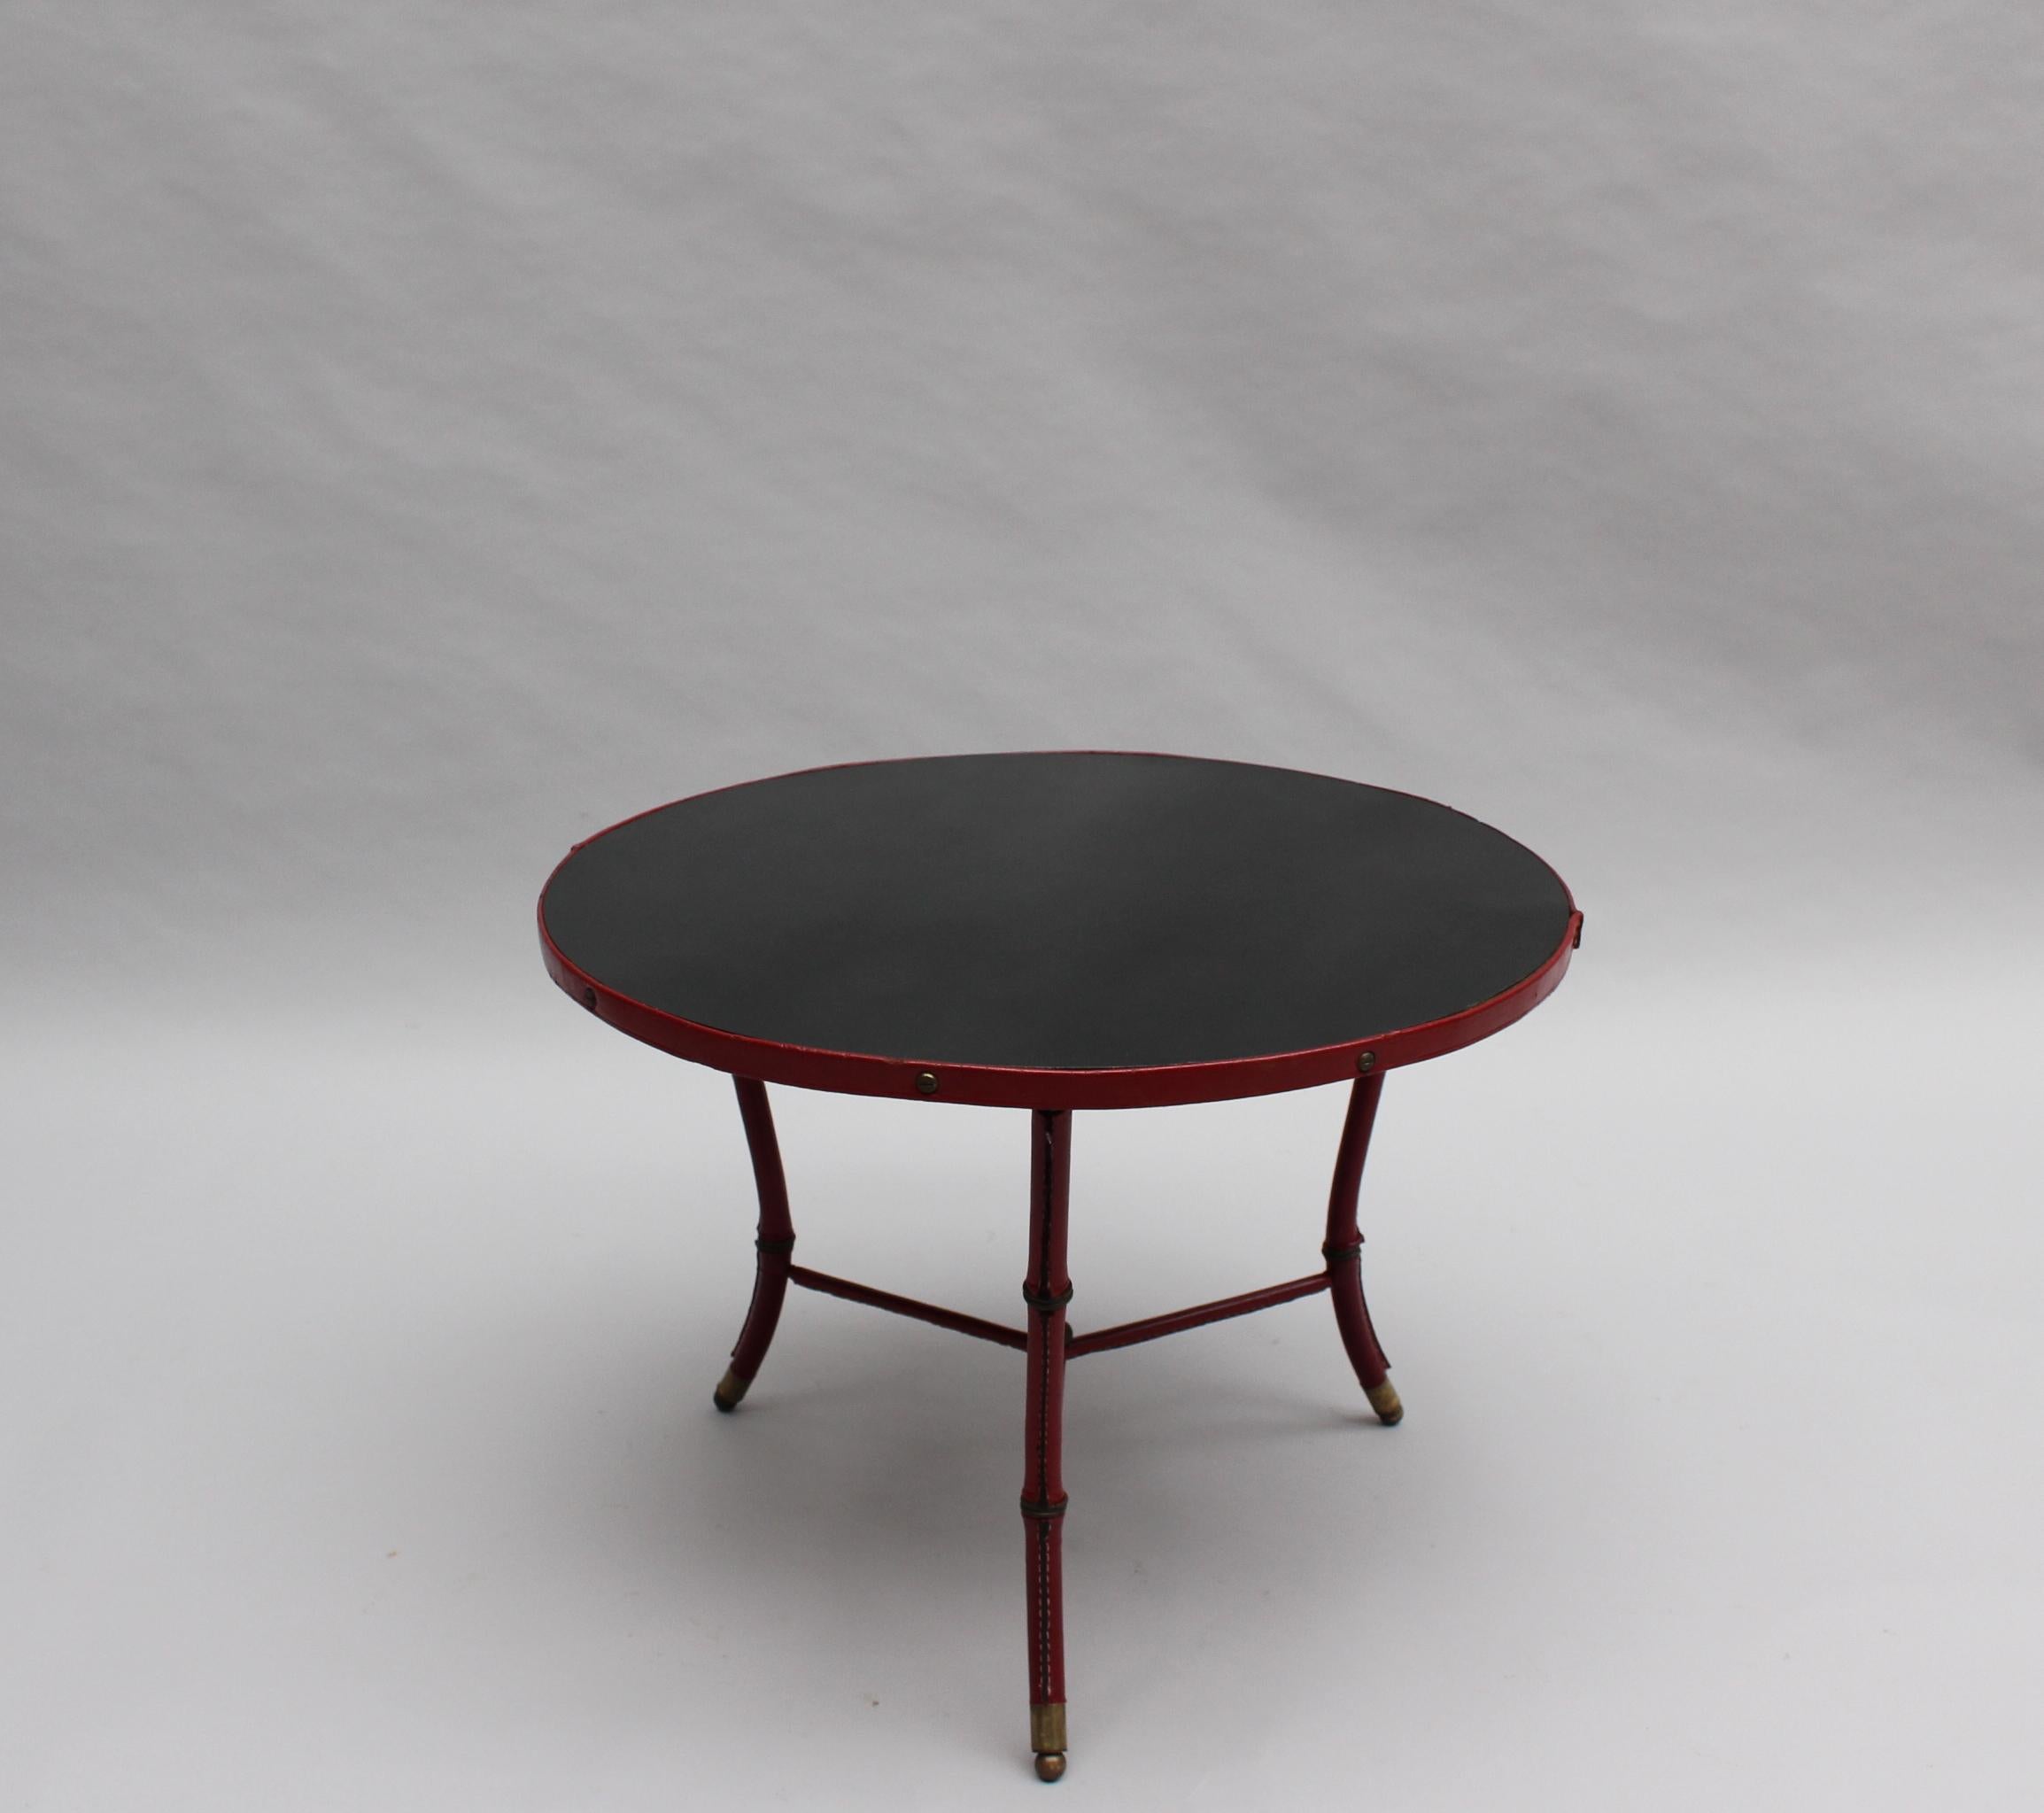 With a red leather covered three legs base, a black laminated round top and bronze details.